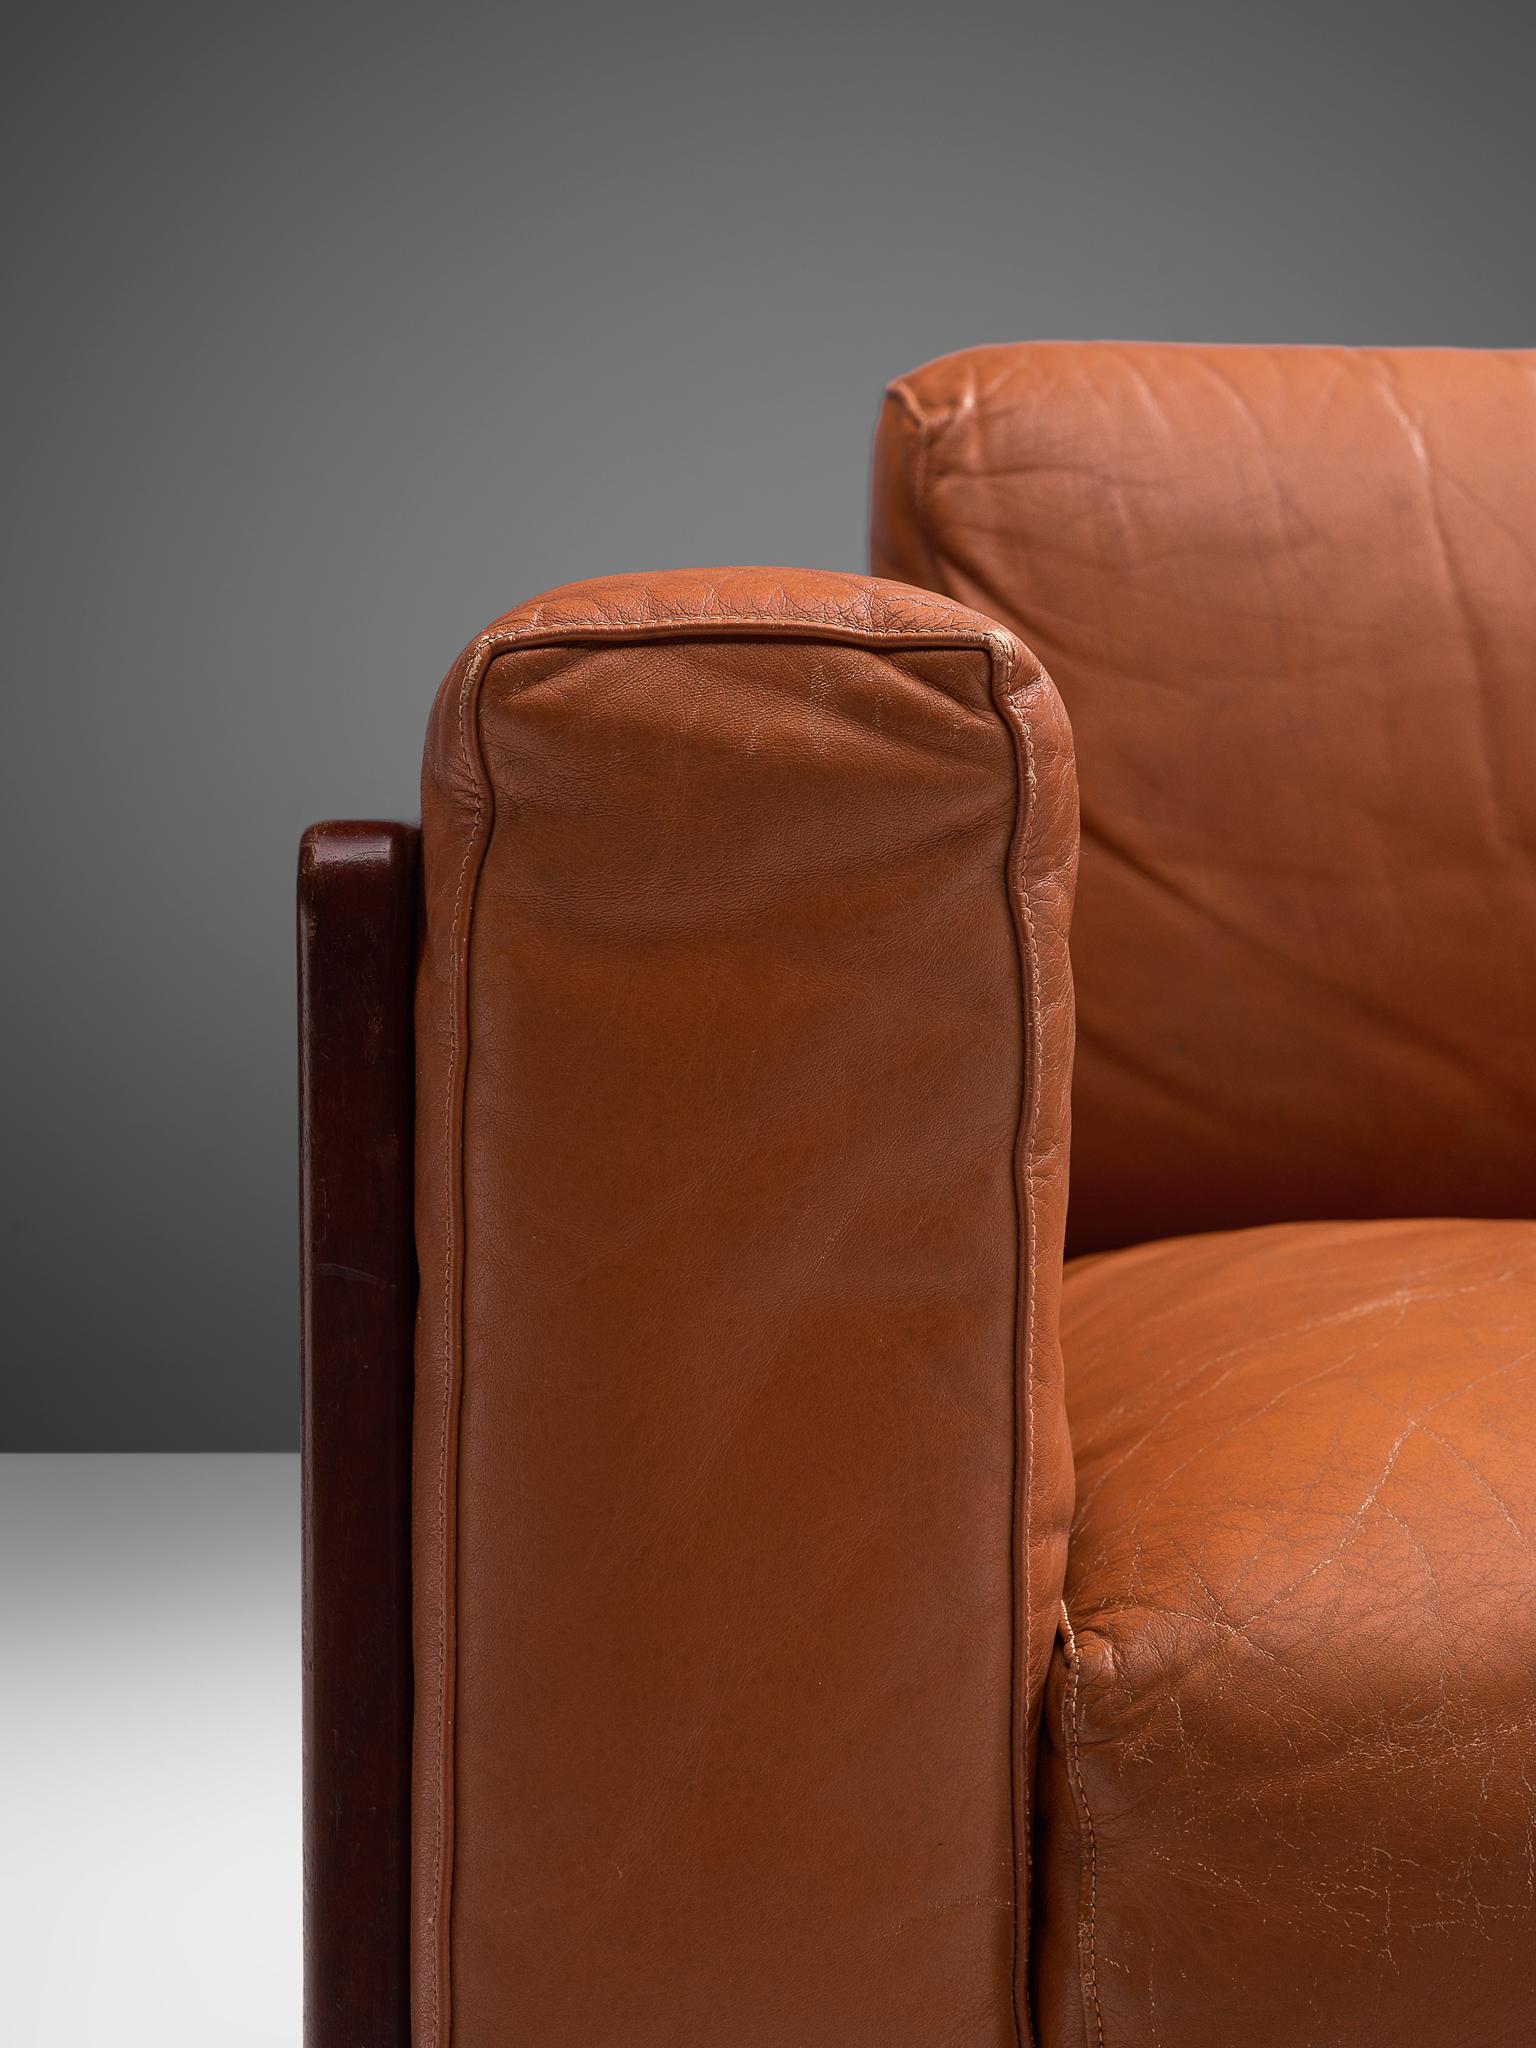 Tobia Scarpa 'Bastiano' Two-Seat Sofa with Cognac Leather 1